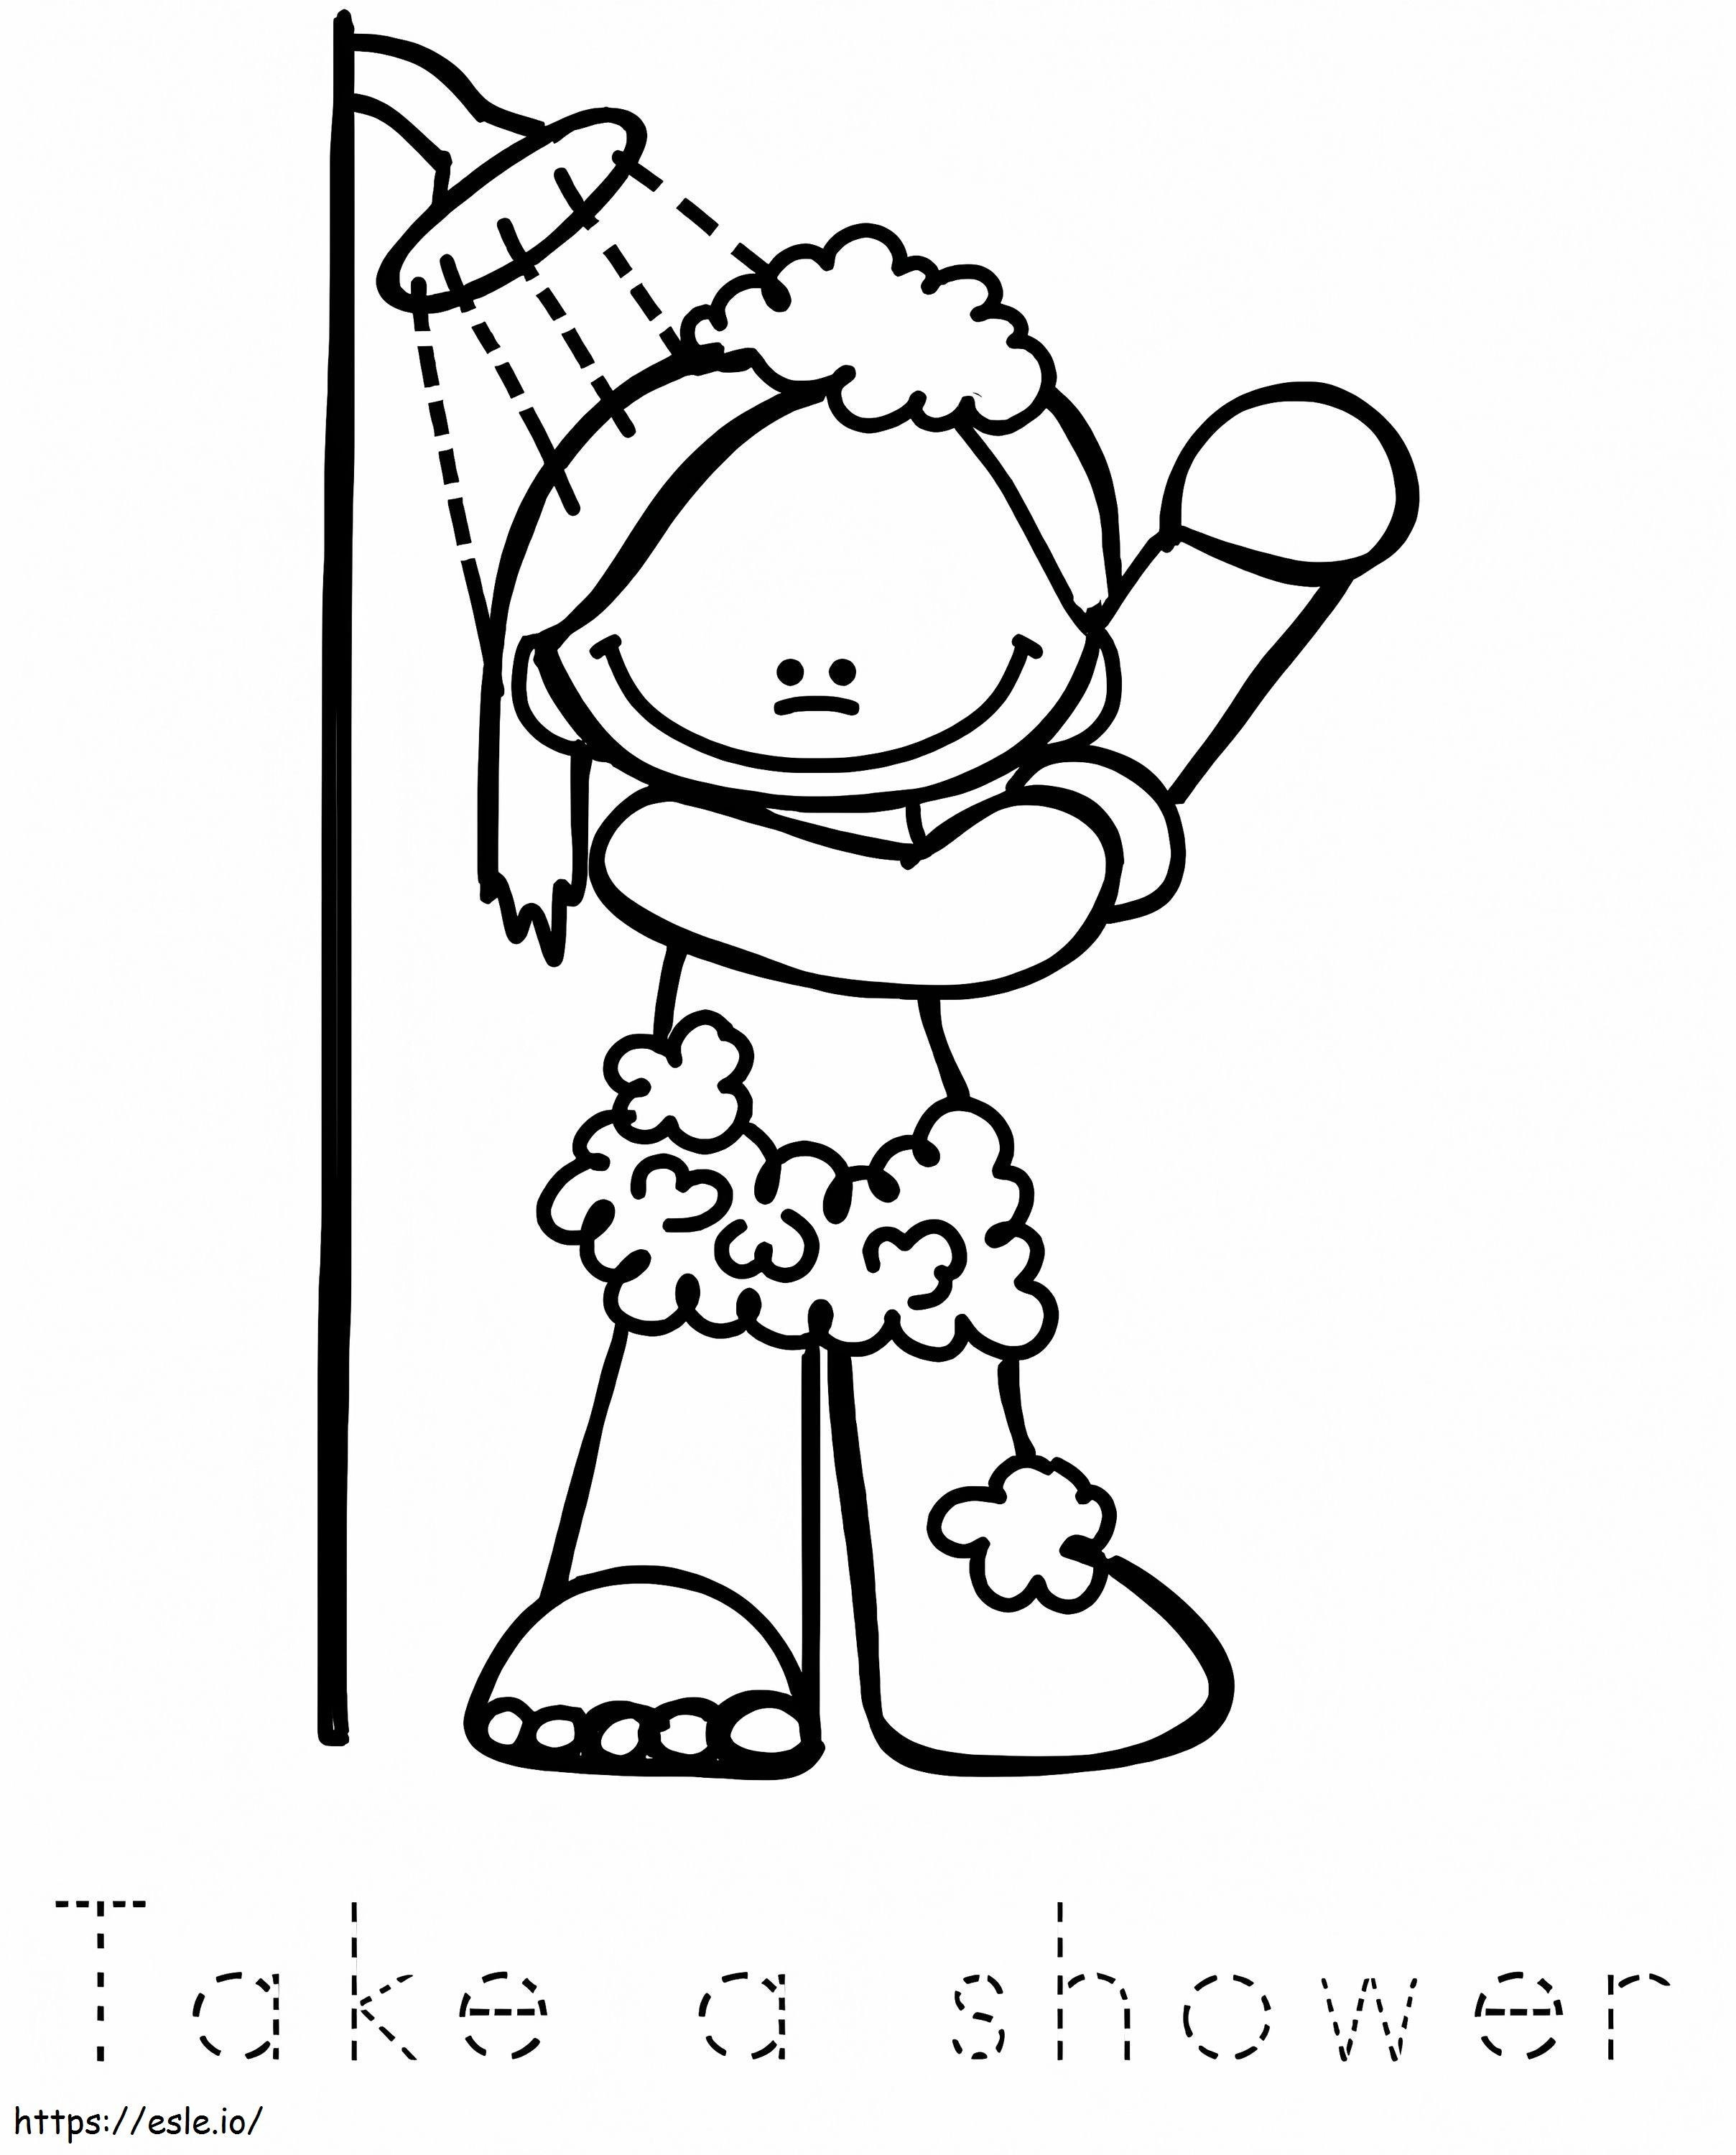 Take A Shower coloring page